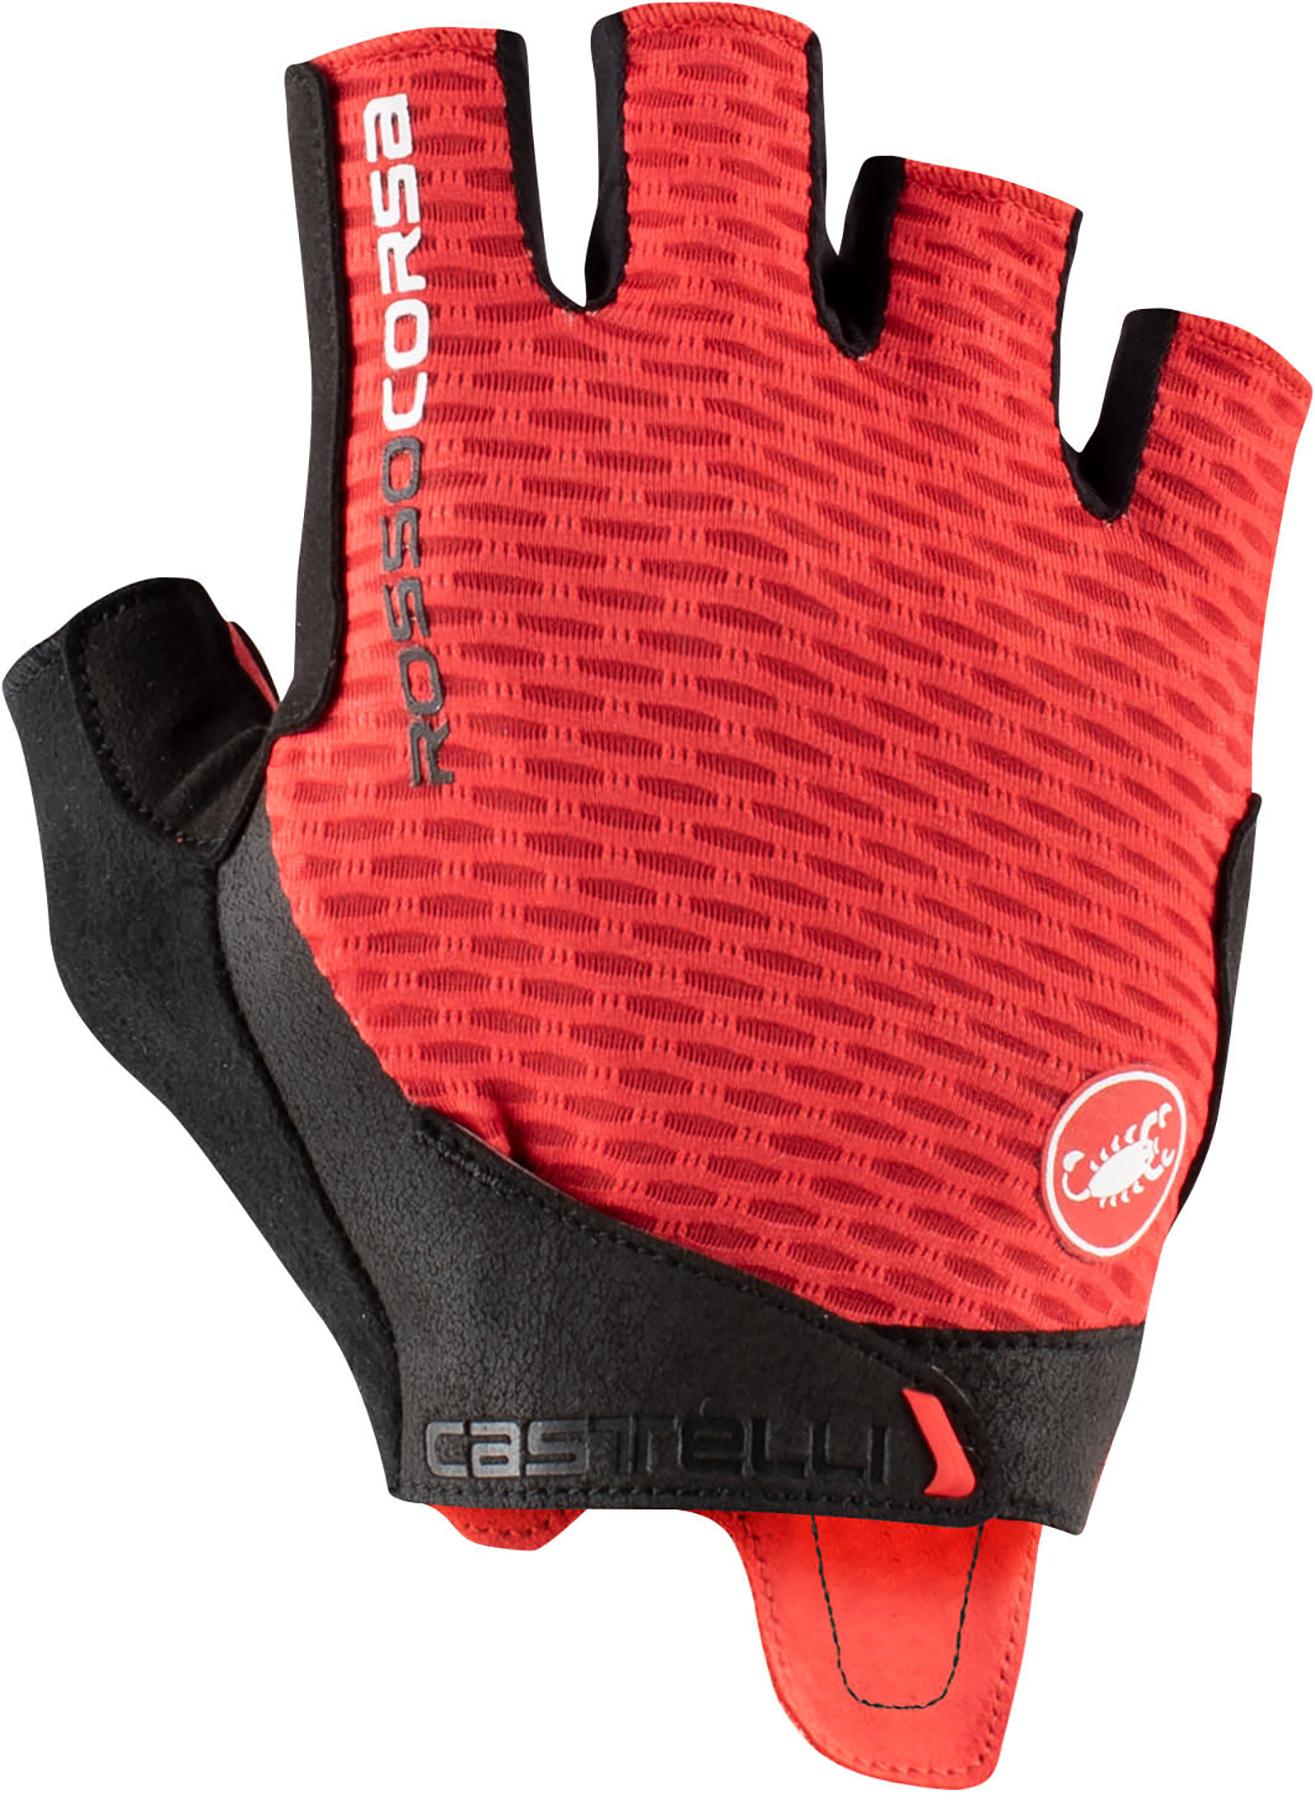 Castelli Rosso Corsa Pro V Cycling Gloves - Red